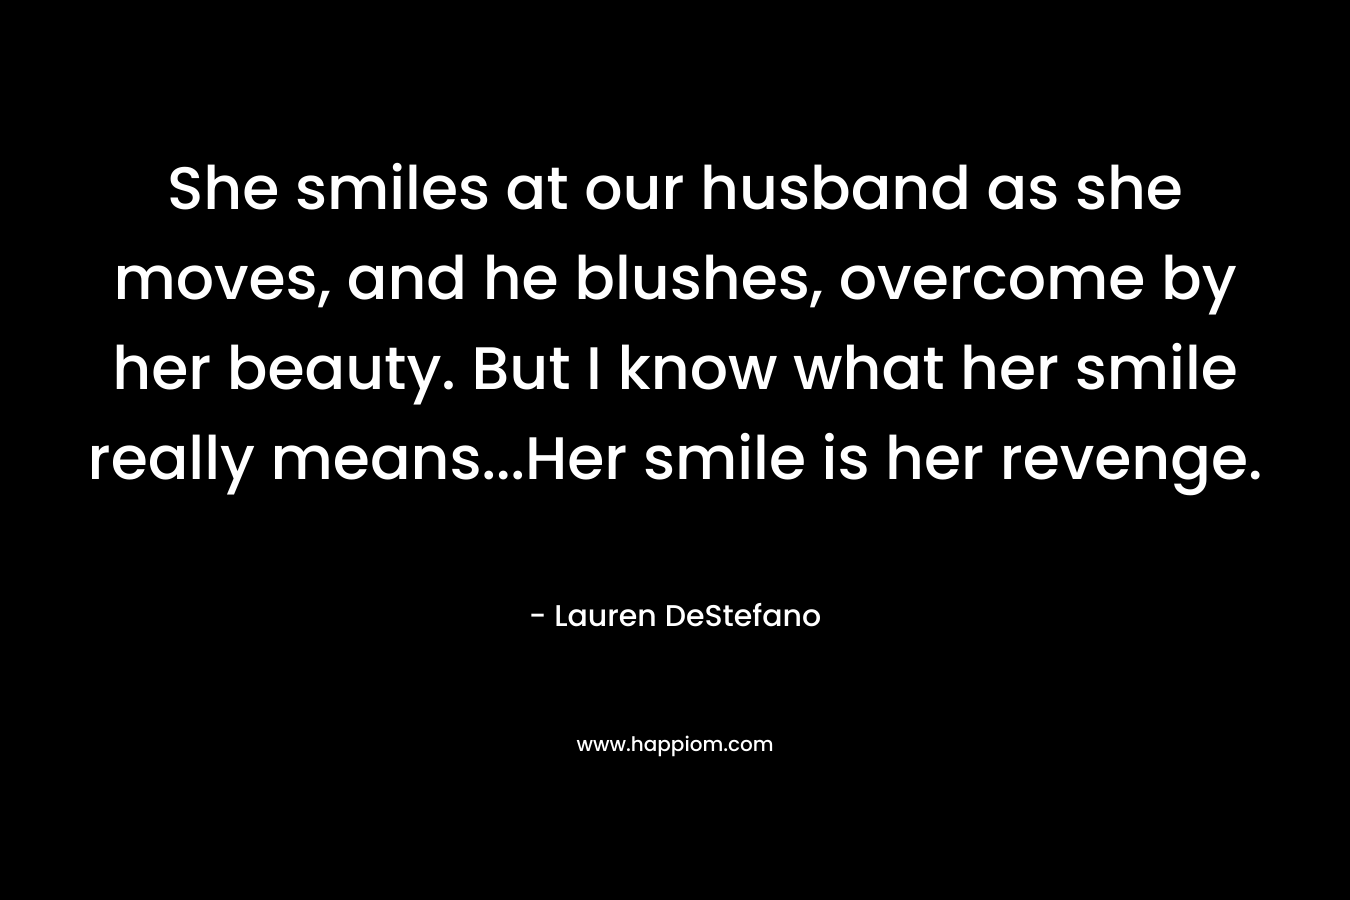 She smiles at our husband as she moves, and he blushes, overcome by her beauty. But I know what her smile really means…Her smile is her revenge. – Lauren DeStefano